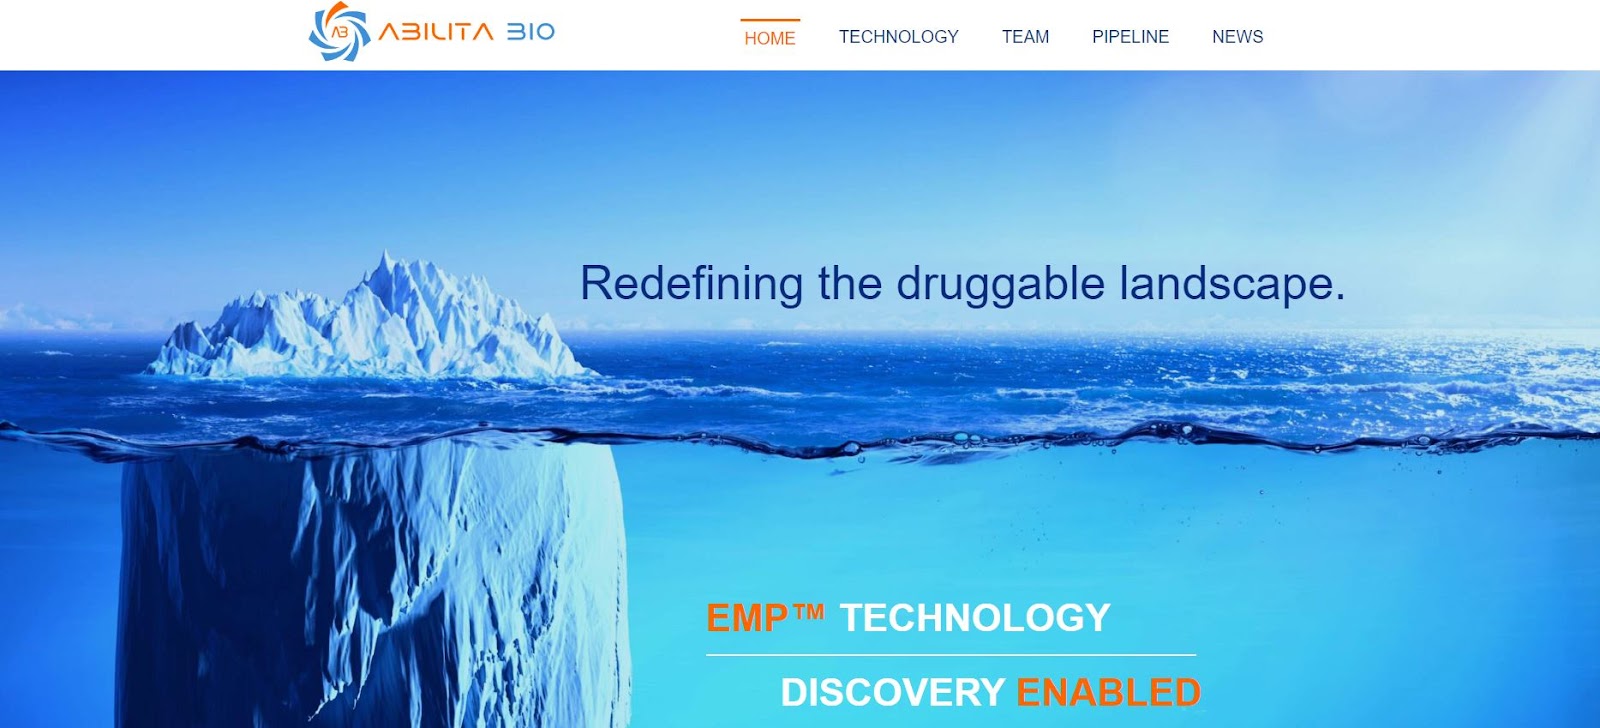 Abilita Bio, Inc. is a startup that is revolutionizing the drug discovery process.